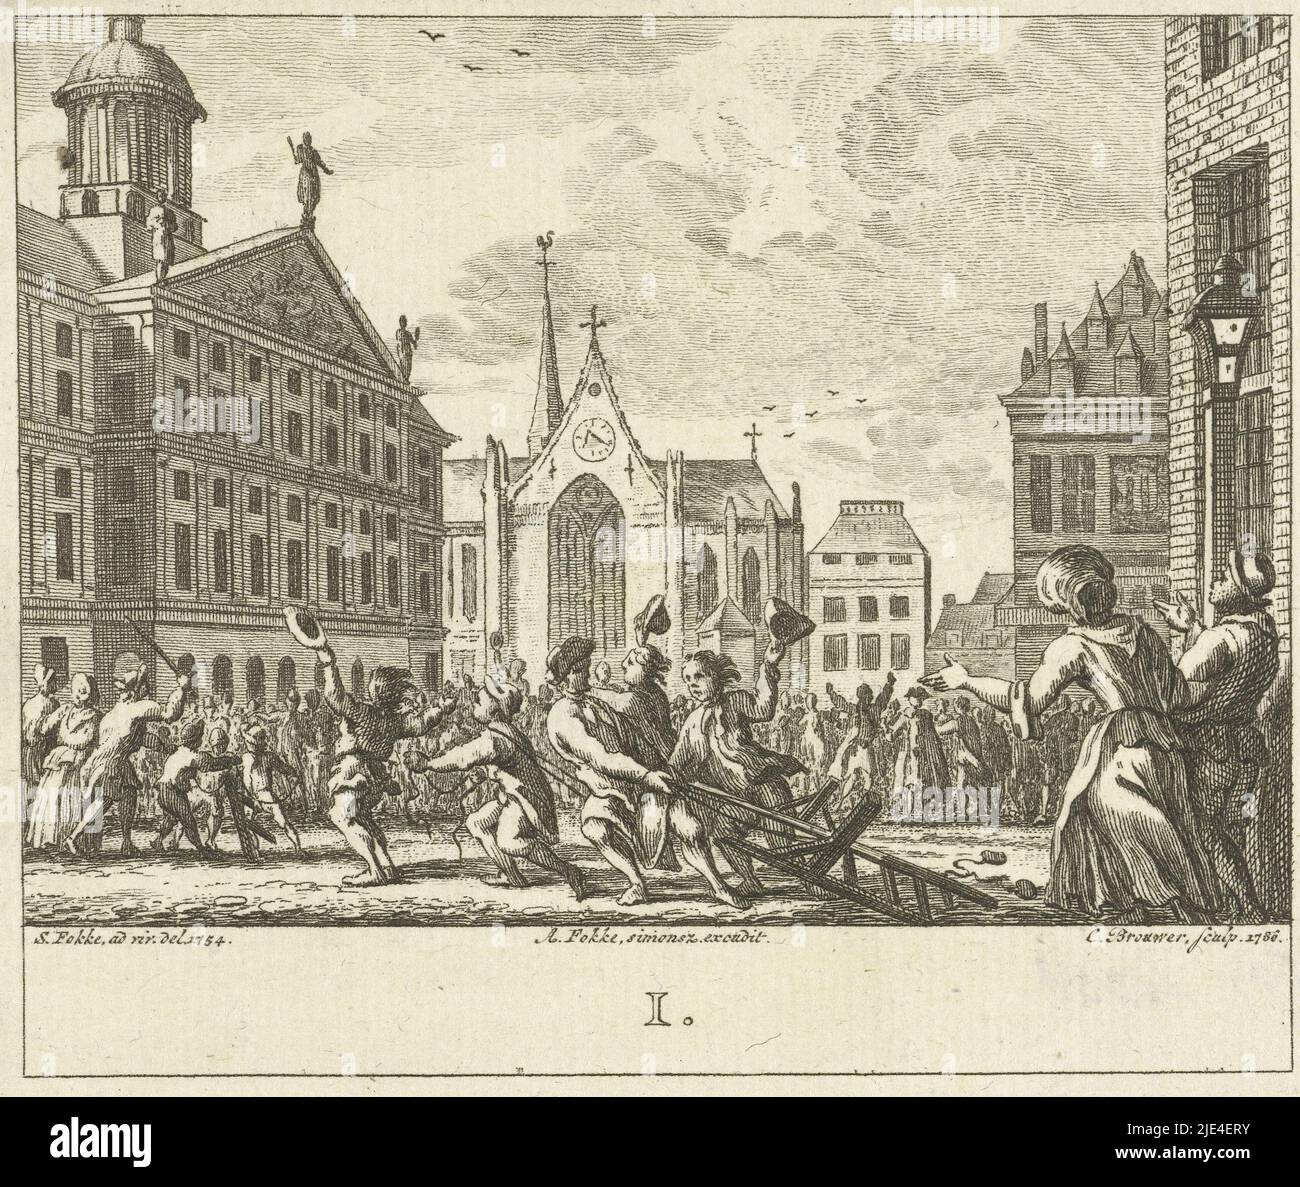 Revolt at the funeral of Daniël Raap on Dam Square in Amsterdam in 1754, Cornelis Brouwer, after Simon Fokke, 1786, Revolt at the funeral of Daniël Raap on Dam Square in Amsterdam in 1754. Opponents of the Doelists destroy the bier., print maker: Cornelis Brouwer, (mentioned on object), intermediary draughtsman: Simon Fokke, (mentioned on object), publisher: Arend Fokke Simonsz., (mentioned on object), Netherlands, 1786, paper, etching, h 96 mm × w 113 mm Stock Photo